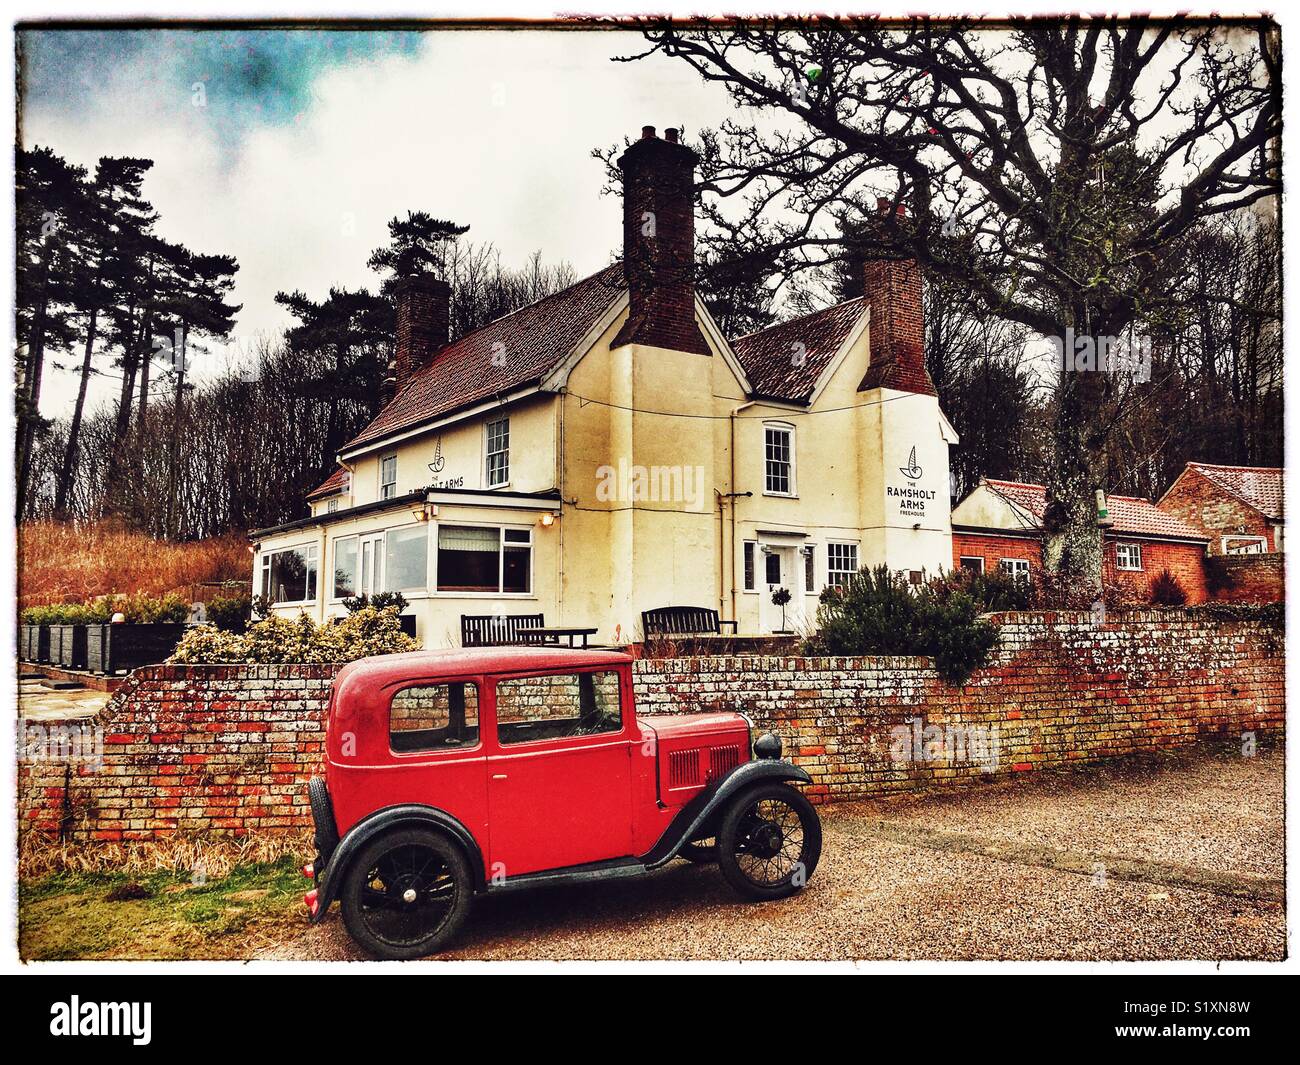 Ramsholt Arms Public House Suffolk England Stock Photo Alamy